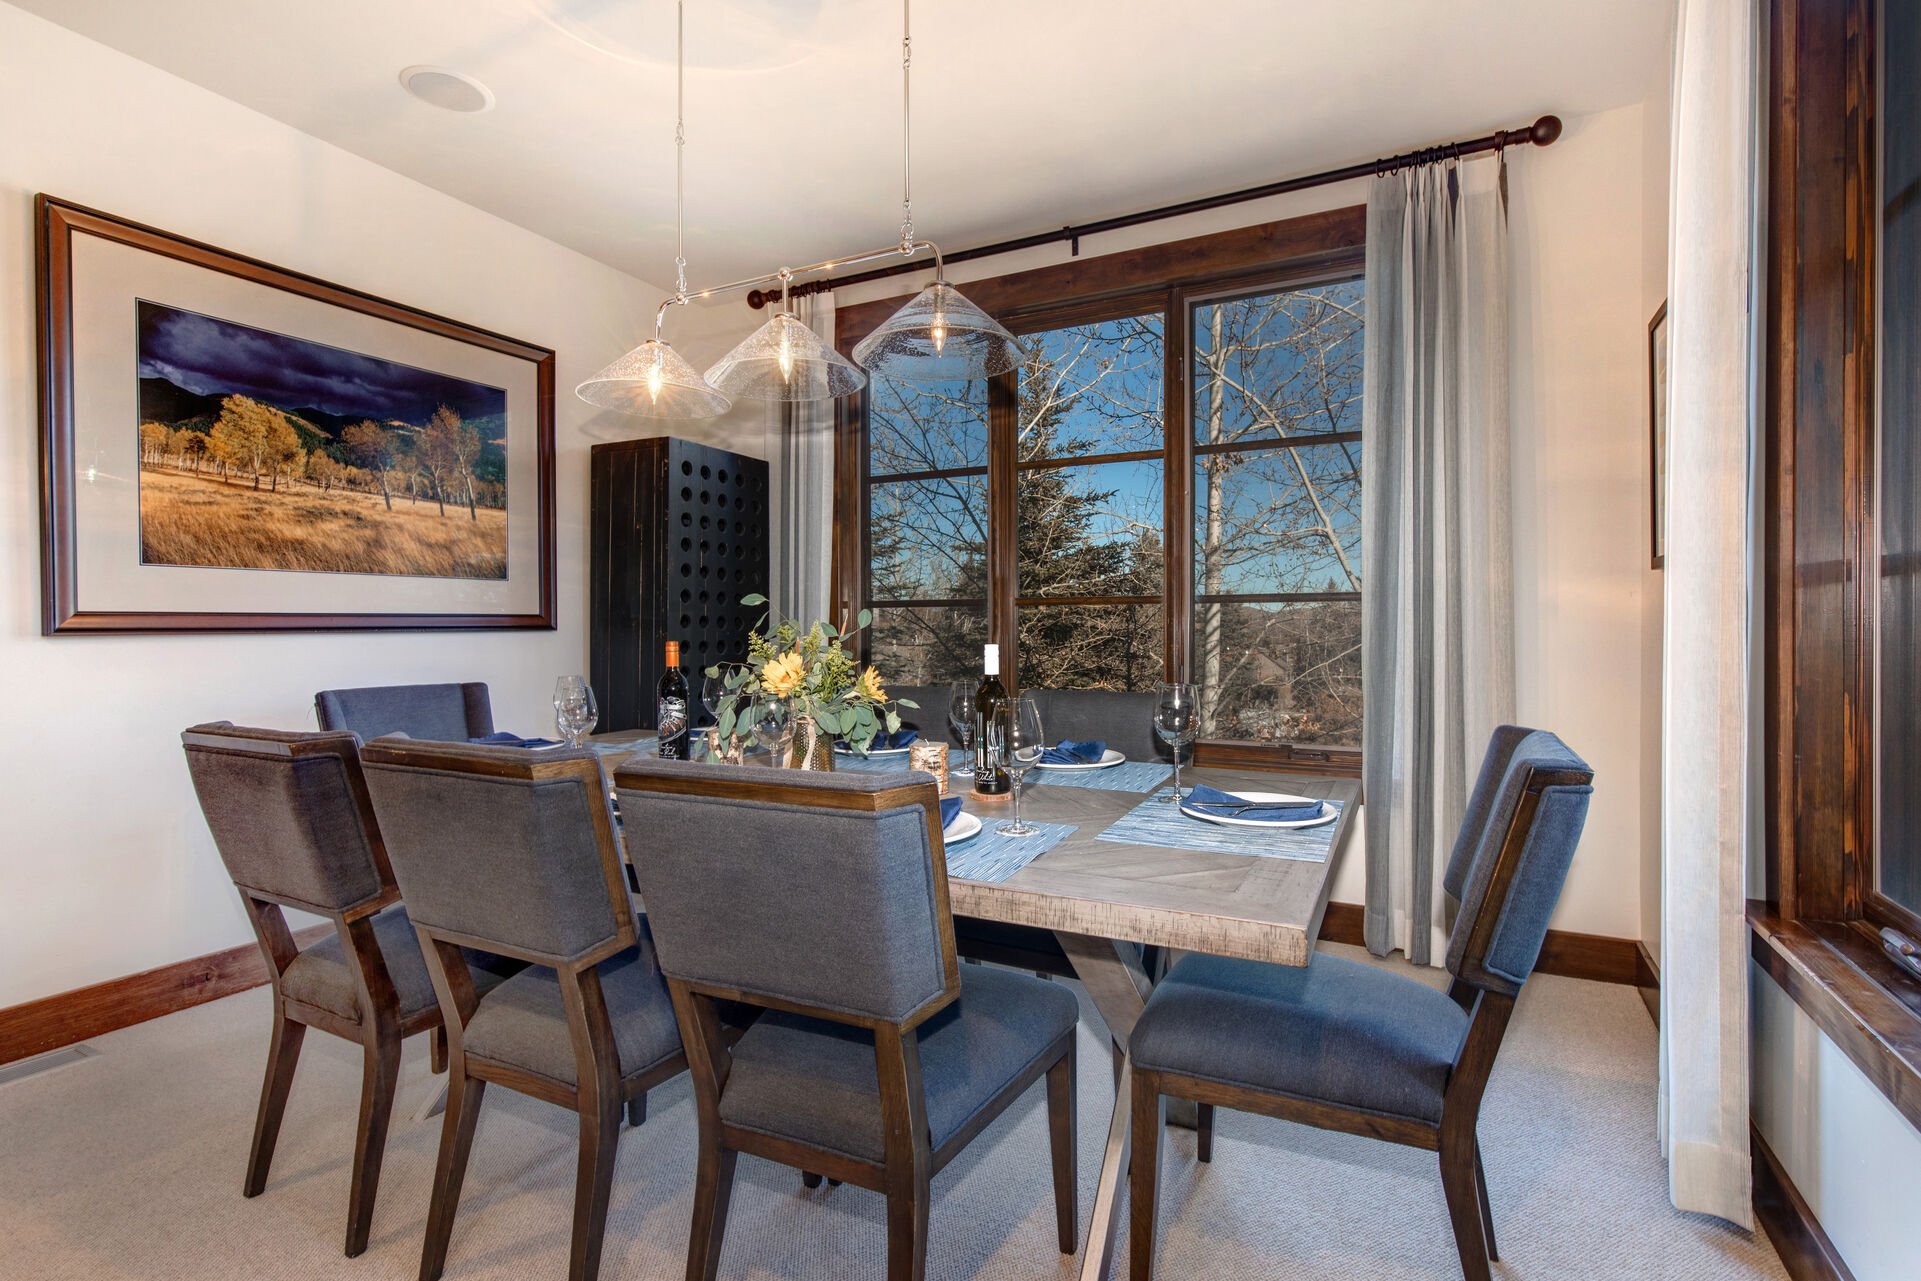 Dining Area for Seating up to Eight Guests